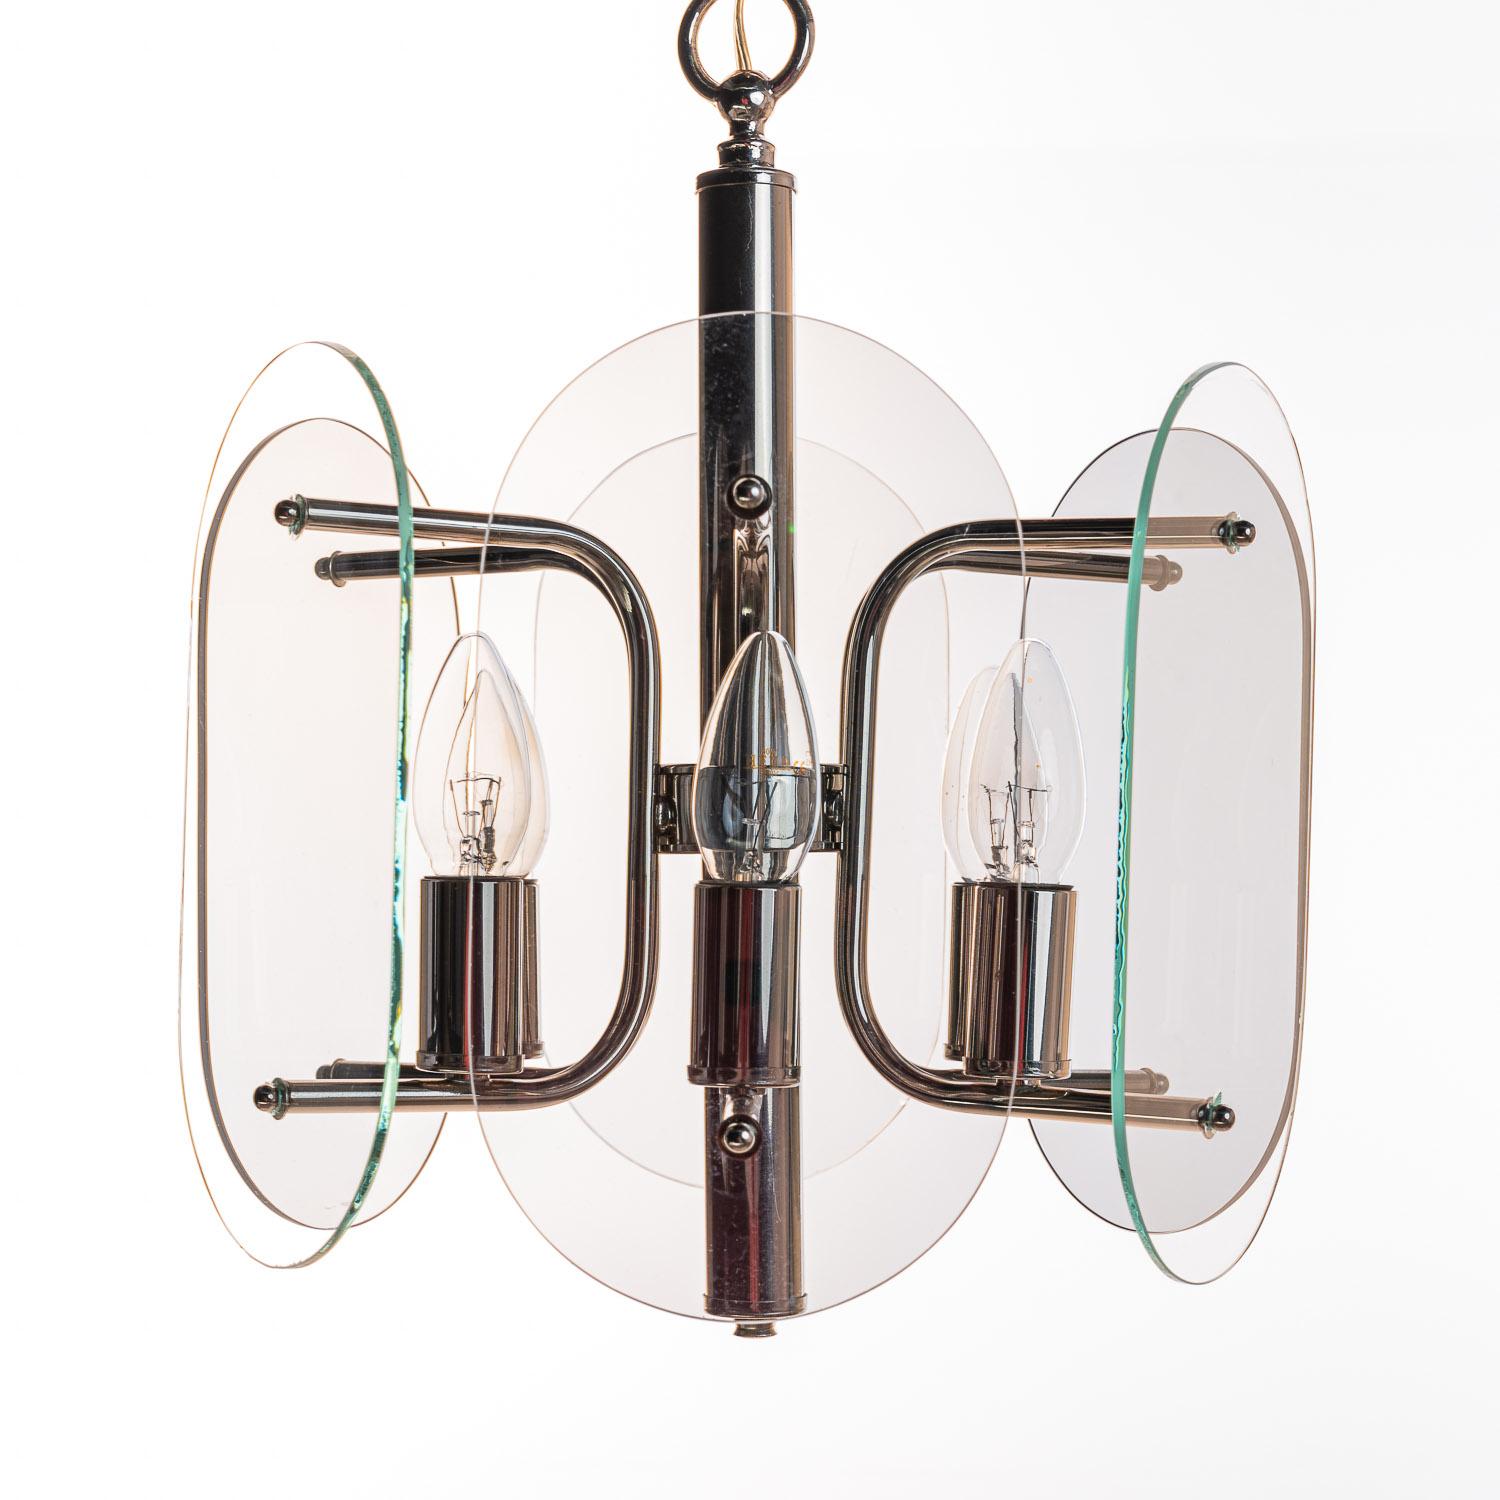 Stylish pendant attributed to Veca. Consists of 6 glass panels, three gray and three clear glass panels. Attached to a chrome frame. Veca was specialized in the production of glass lighting and mirrors made out of flat rolled glass. An Italian